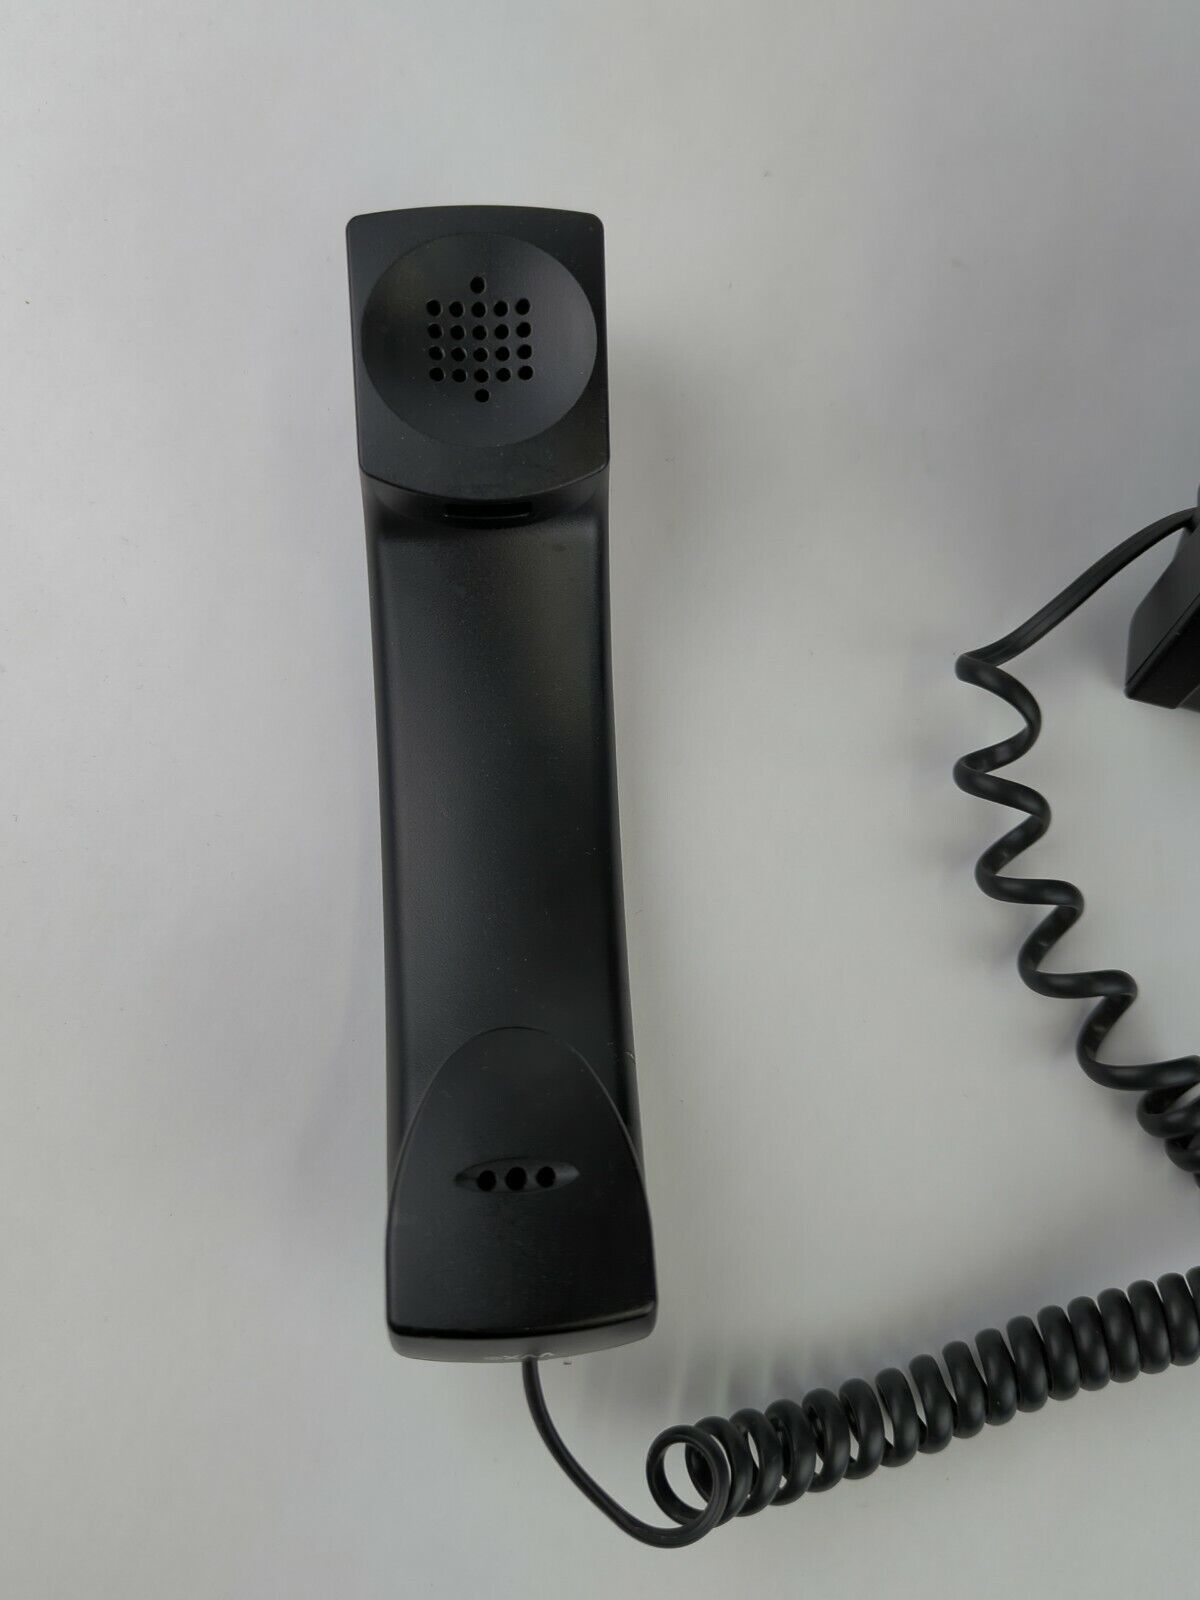 Polycom VVX300 2778-13-8999 IP Gigabit Phone with Stand and Handset